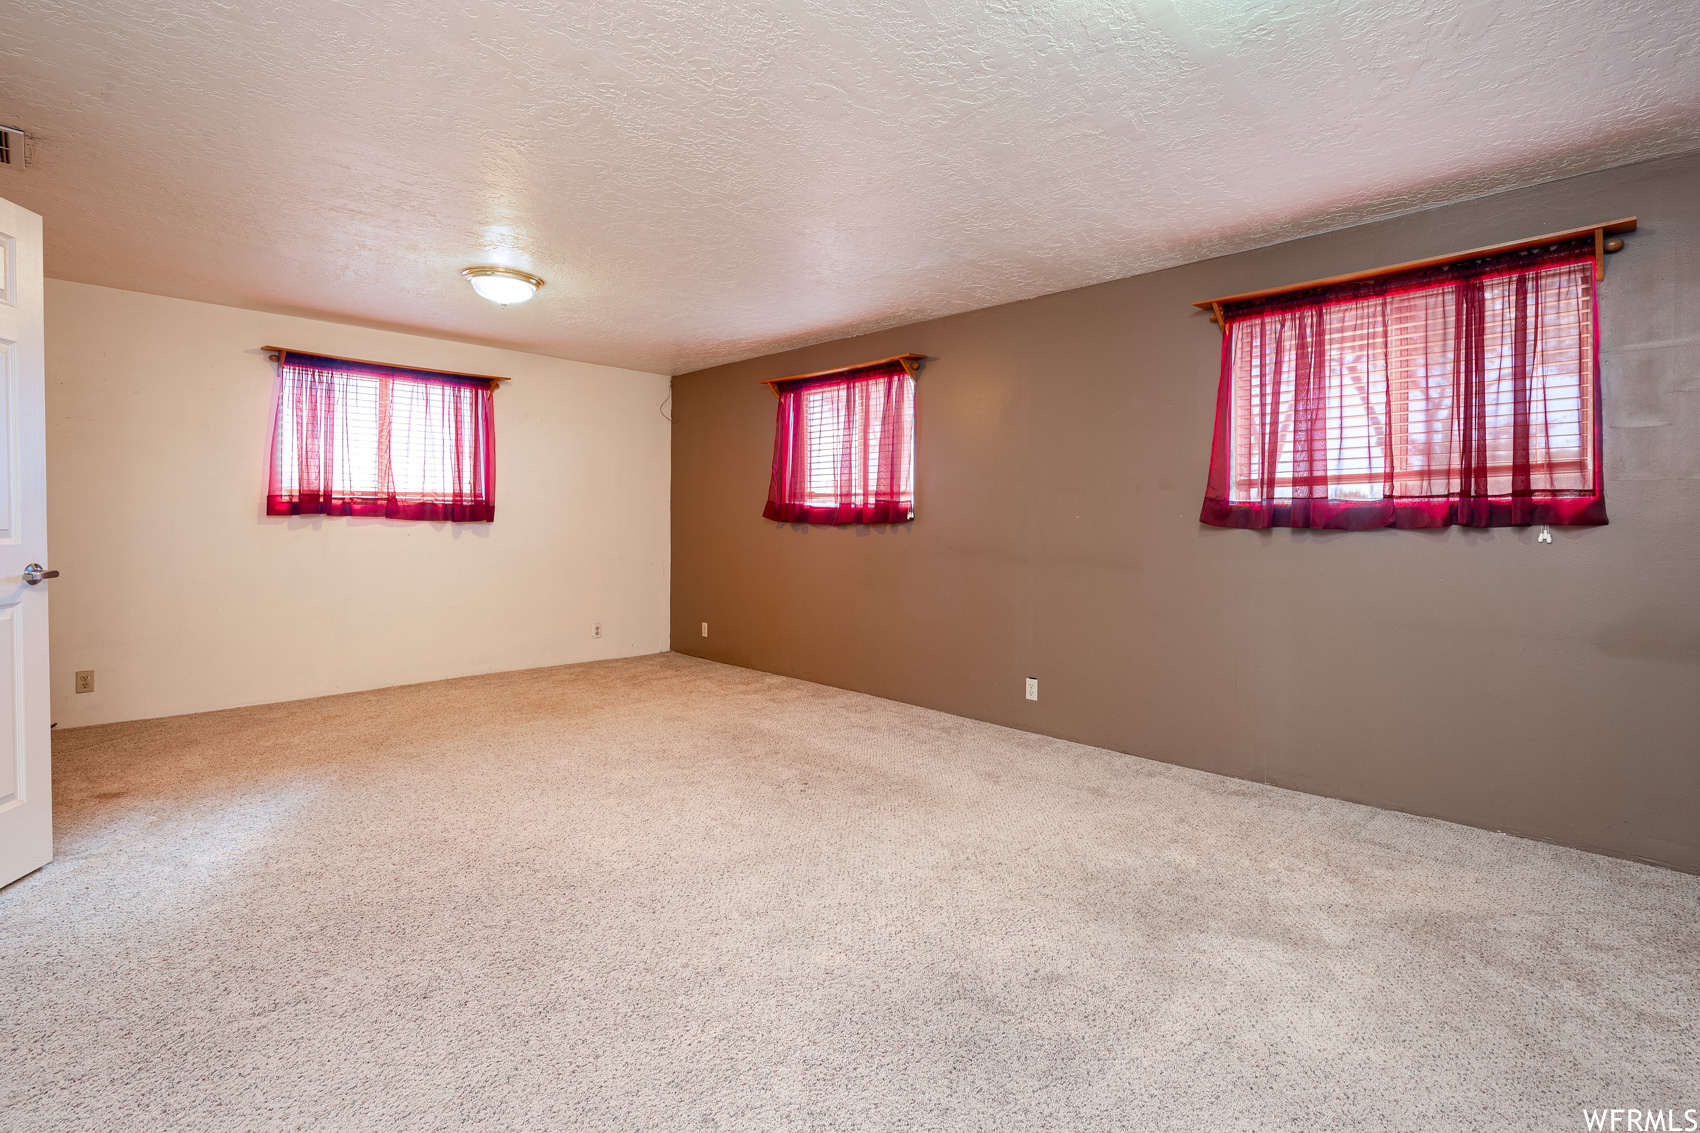 Empty room with a textured ceiling, a wealth of natural light, and light carpet